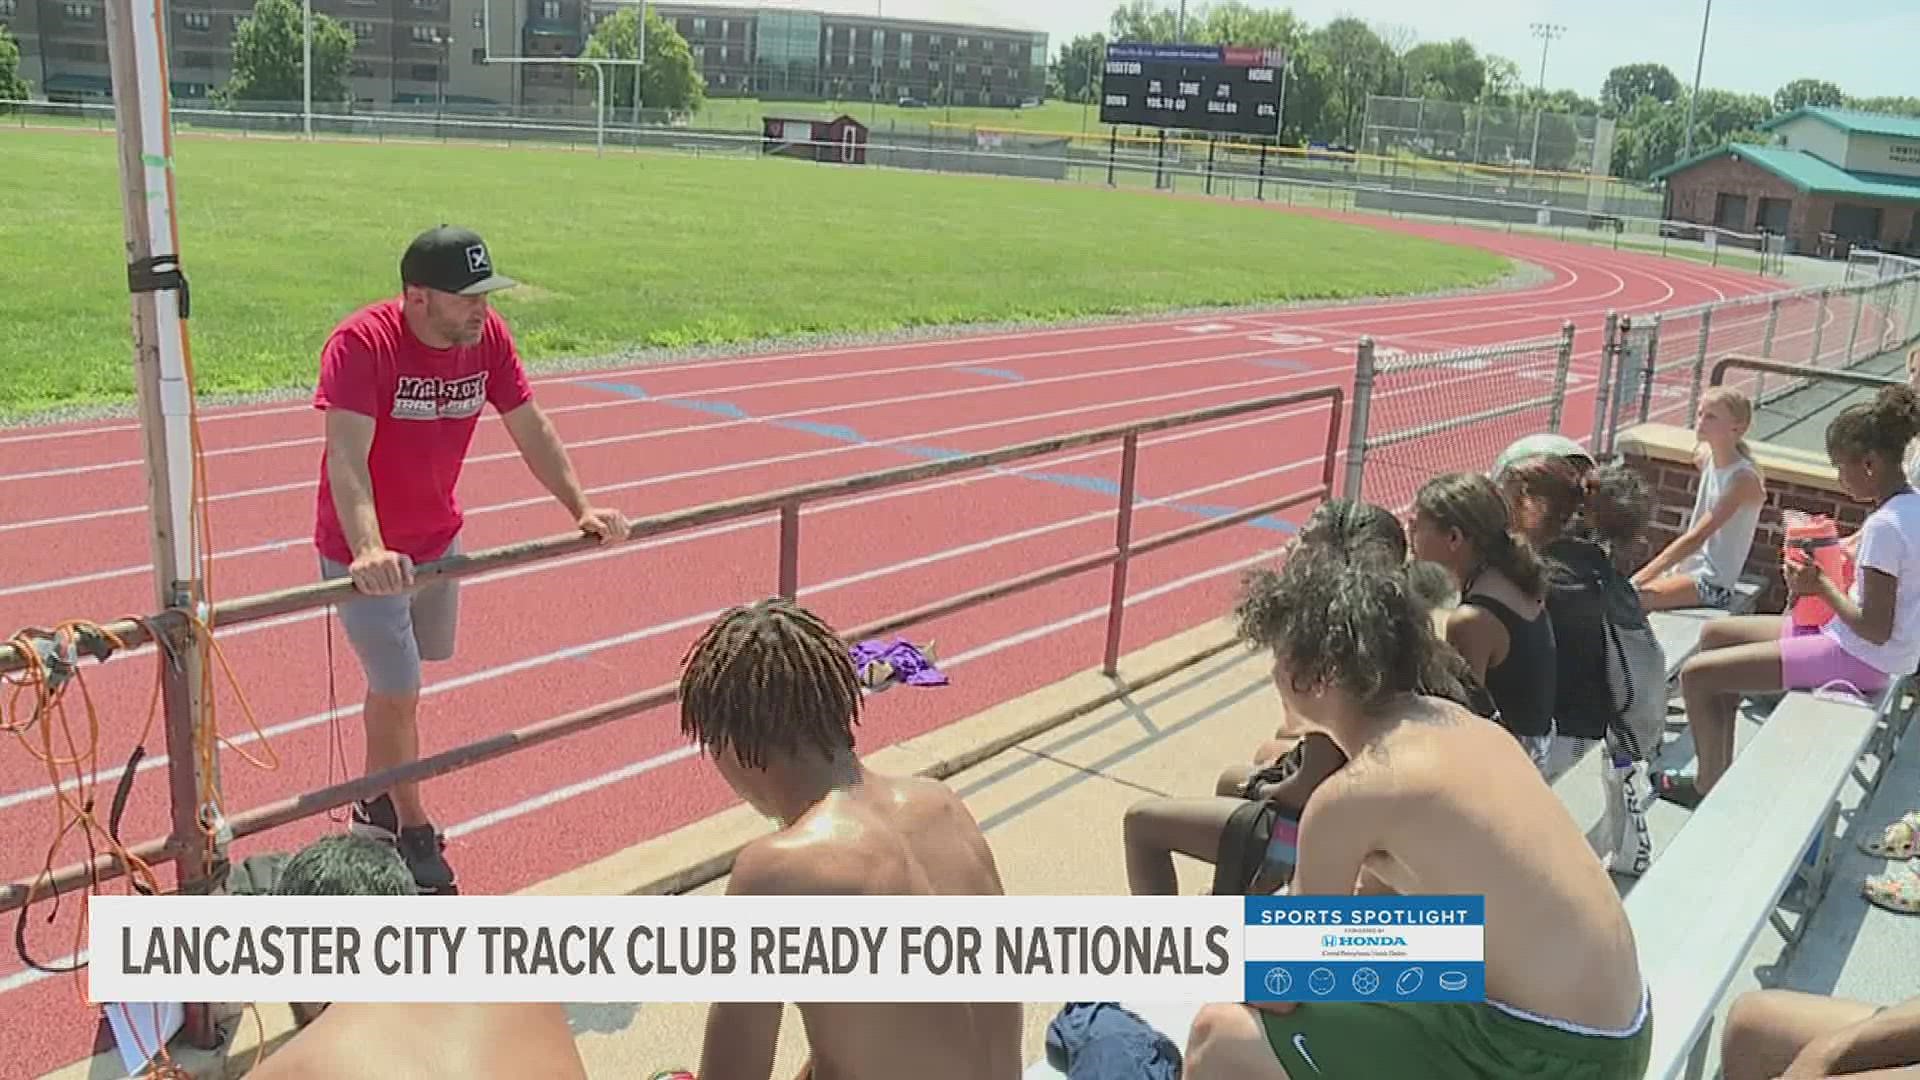 The team will send 14 athletes to compete in the national meet